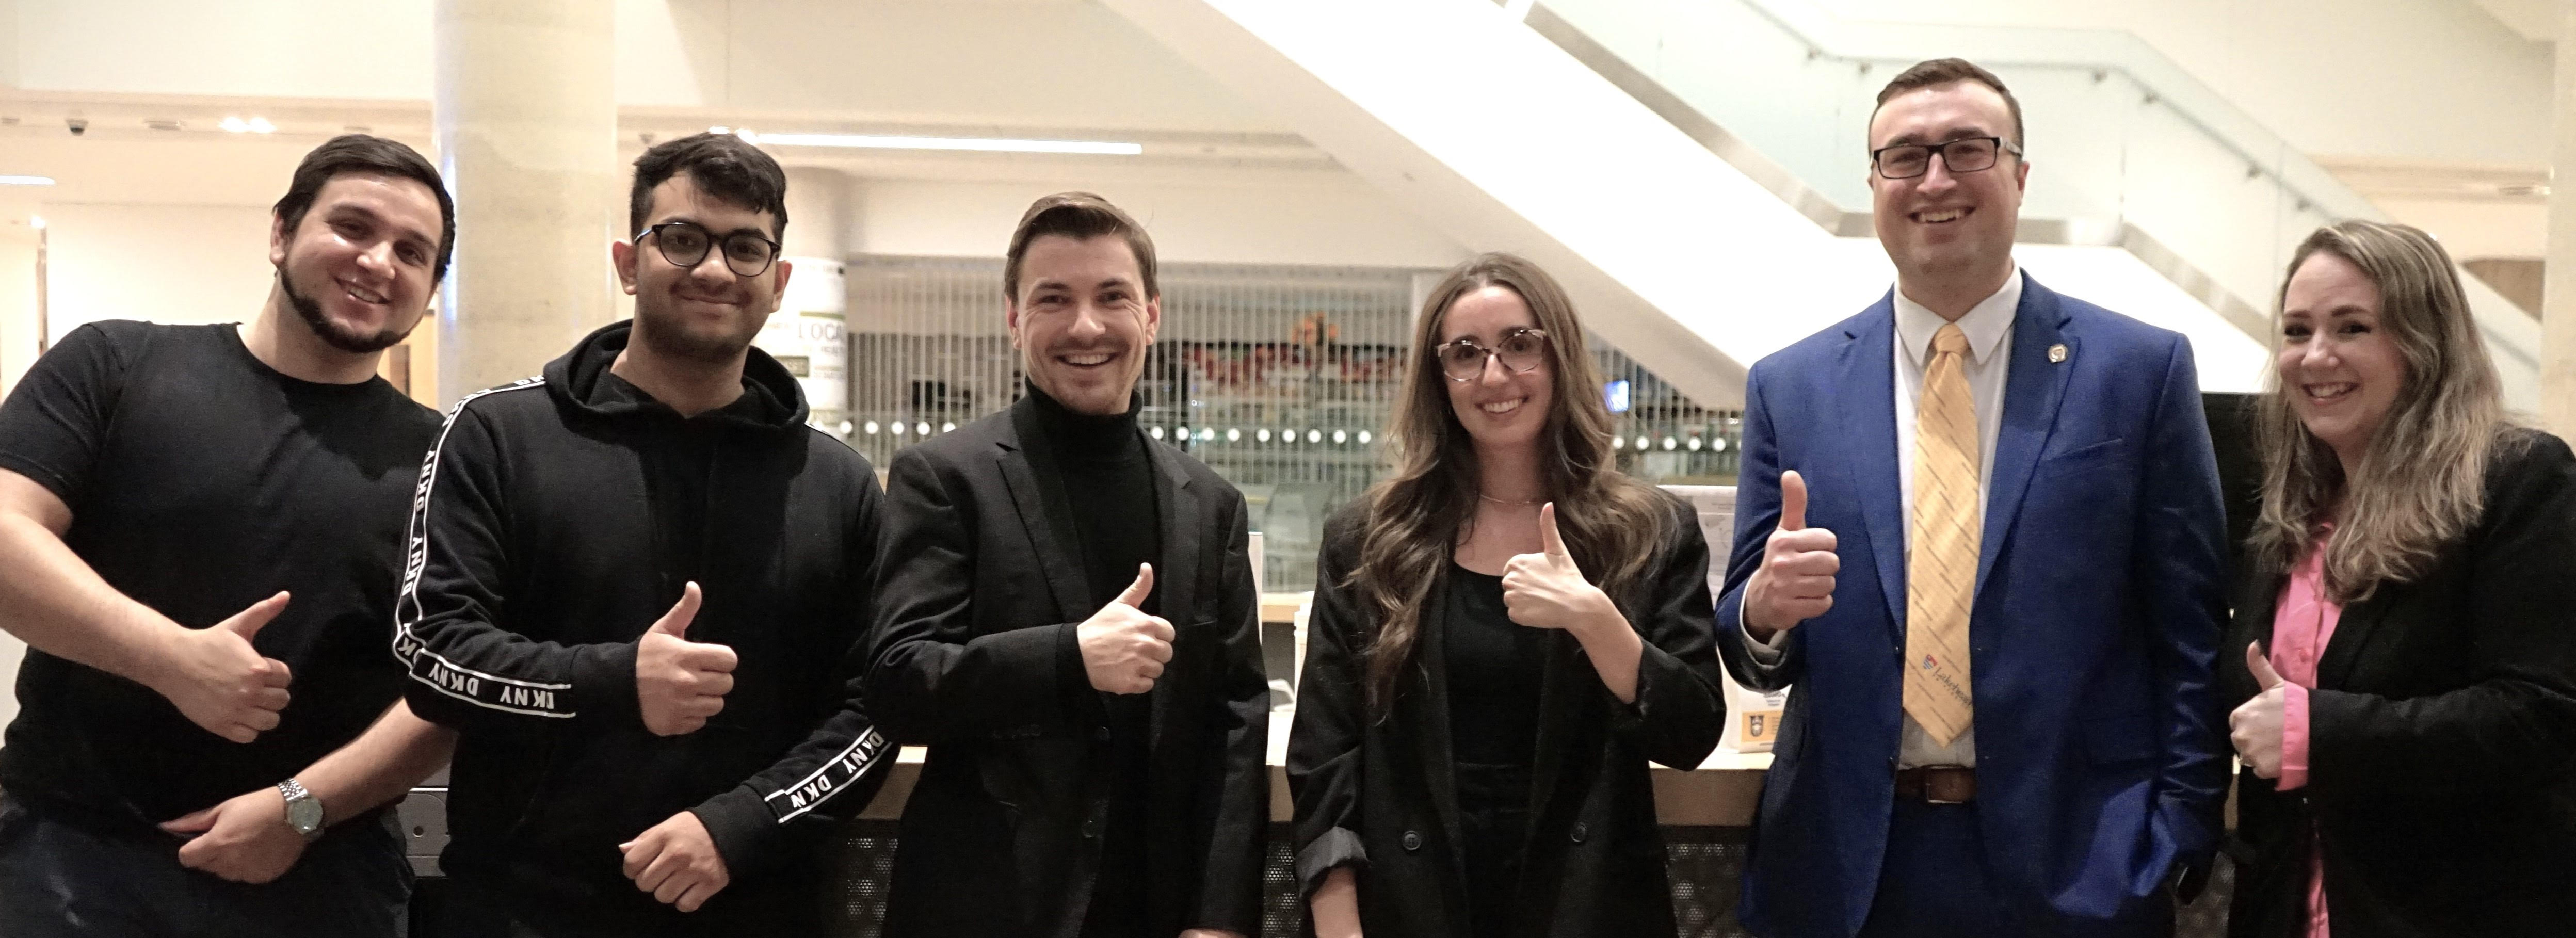 Business Orillia Students Society members give thumbs up after event on campus